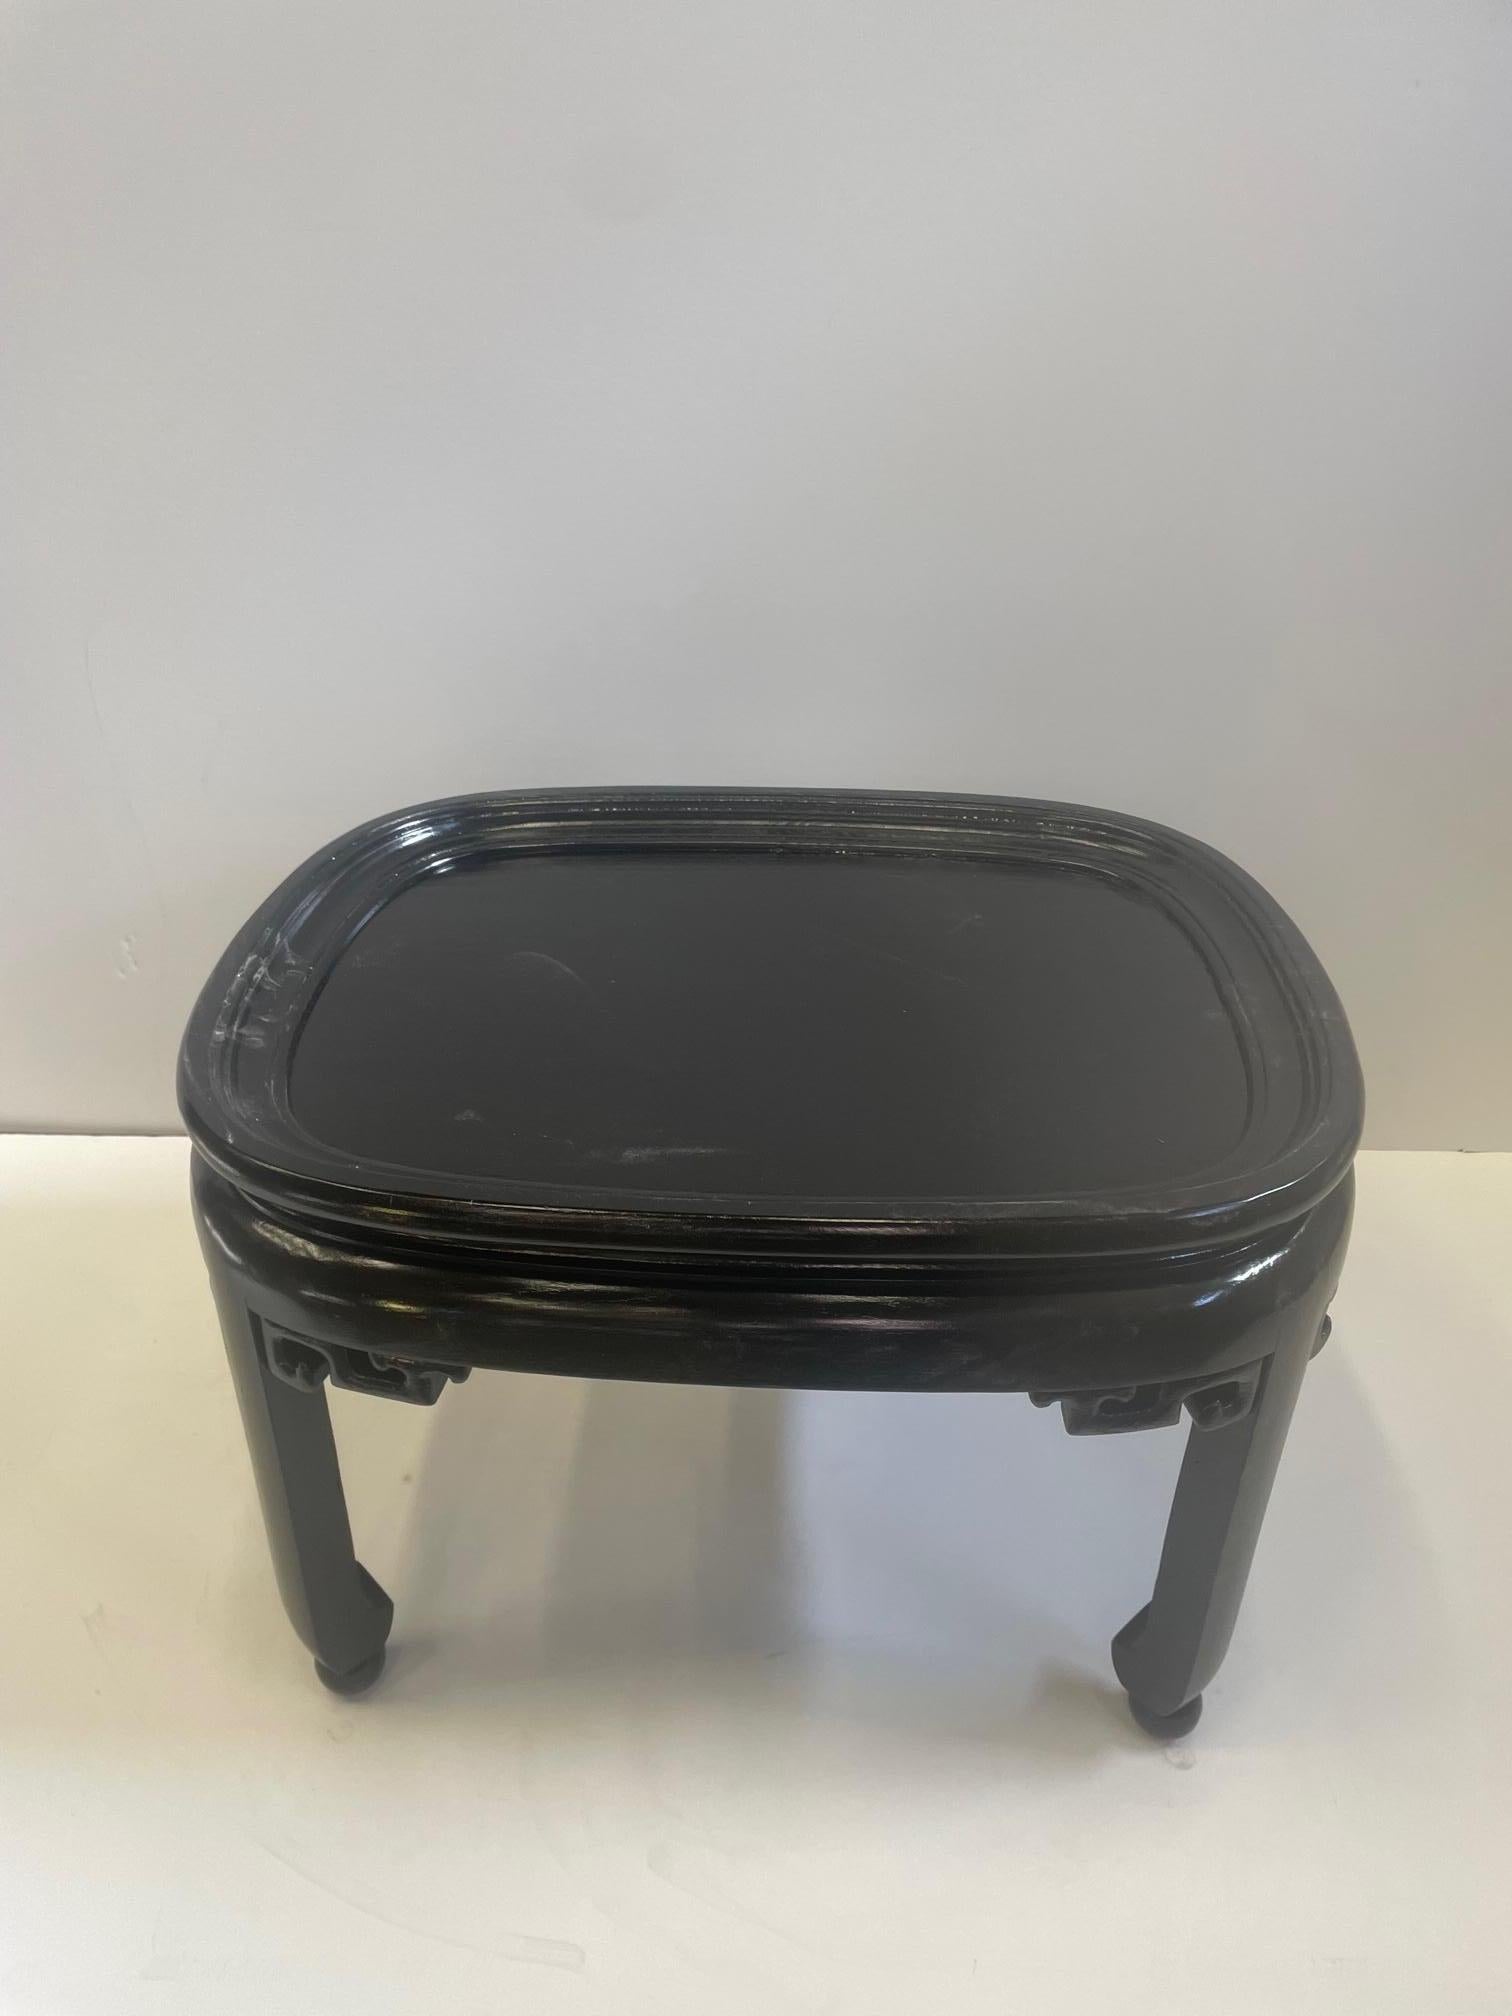 Handsome Asian Style Brass Tray Coffee Table with Ebonized Base In Good Condition For Sale In Hopewell, NJ